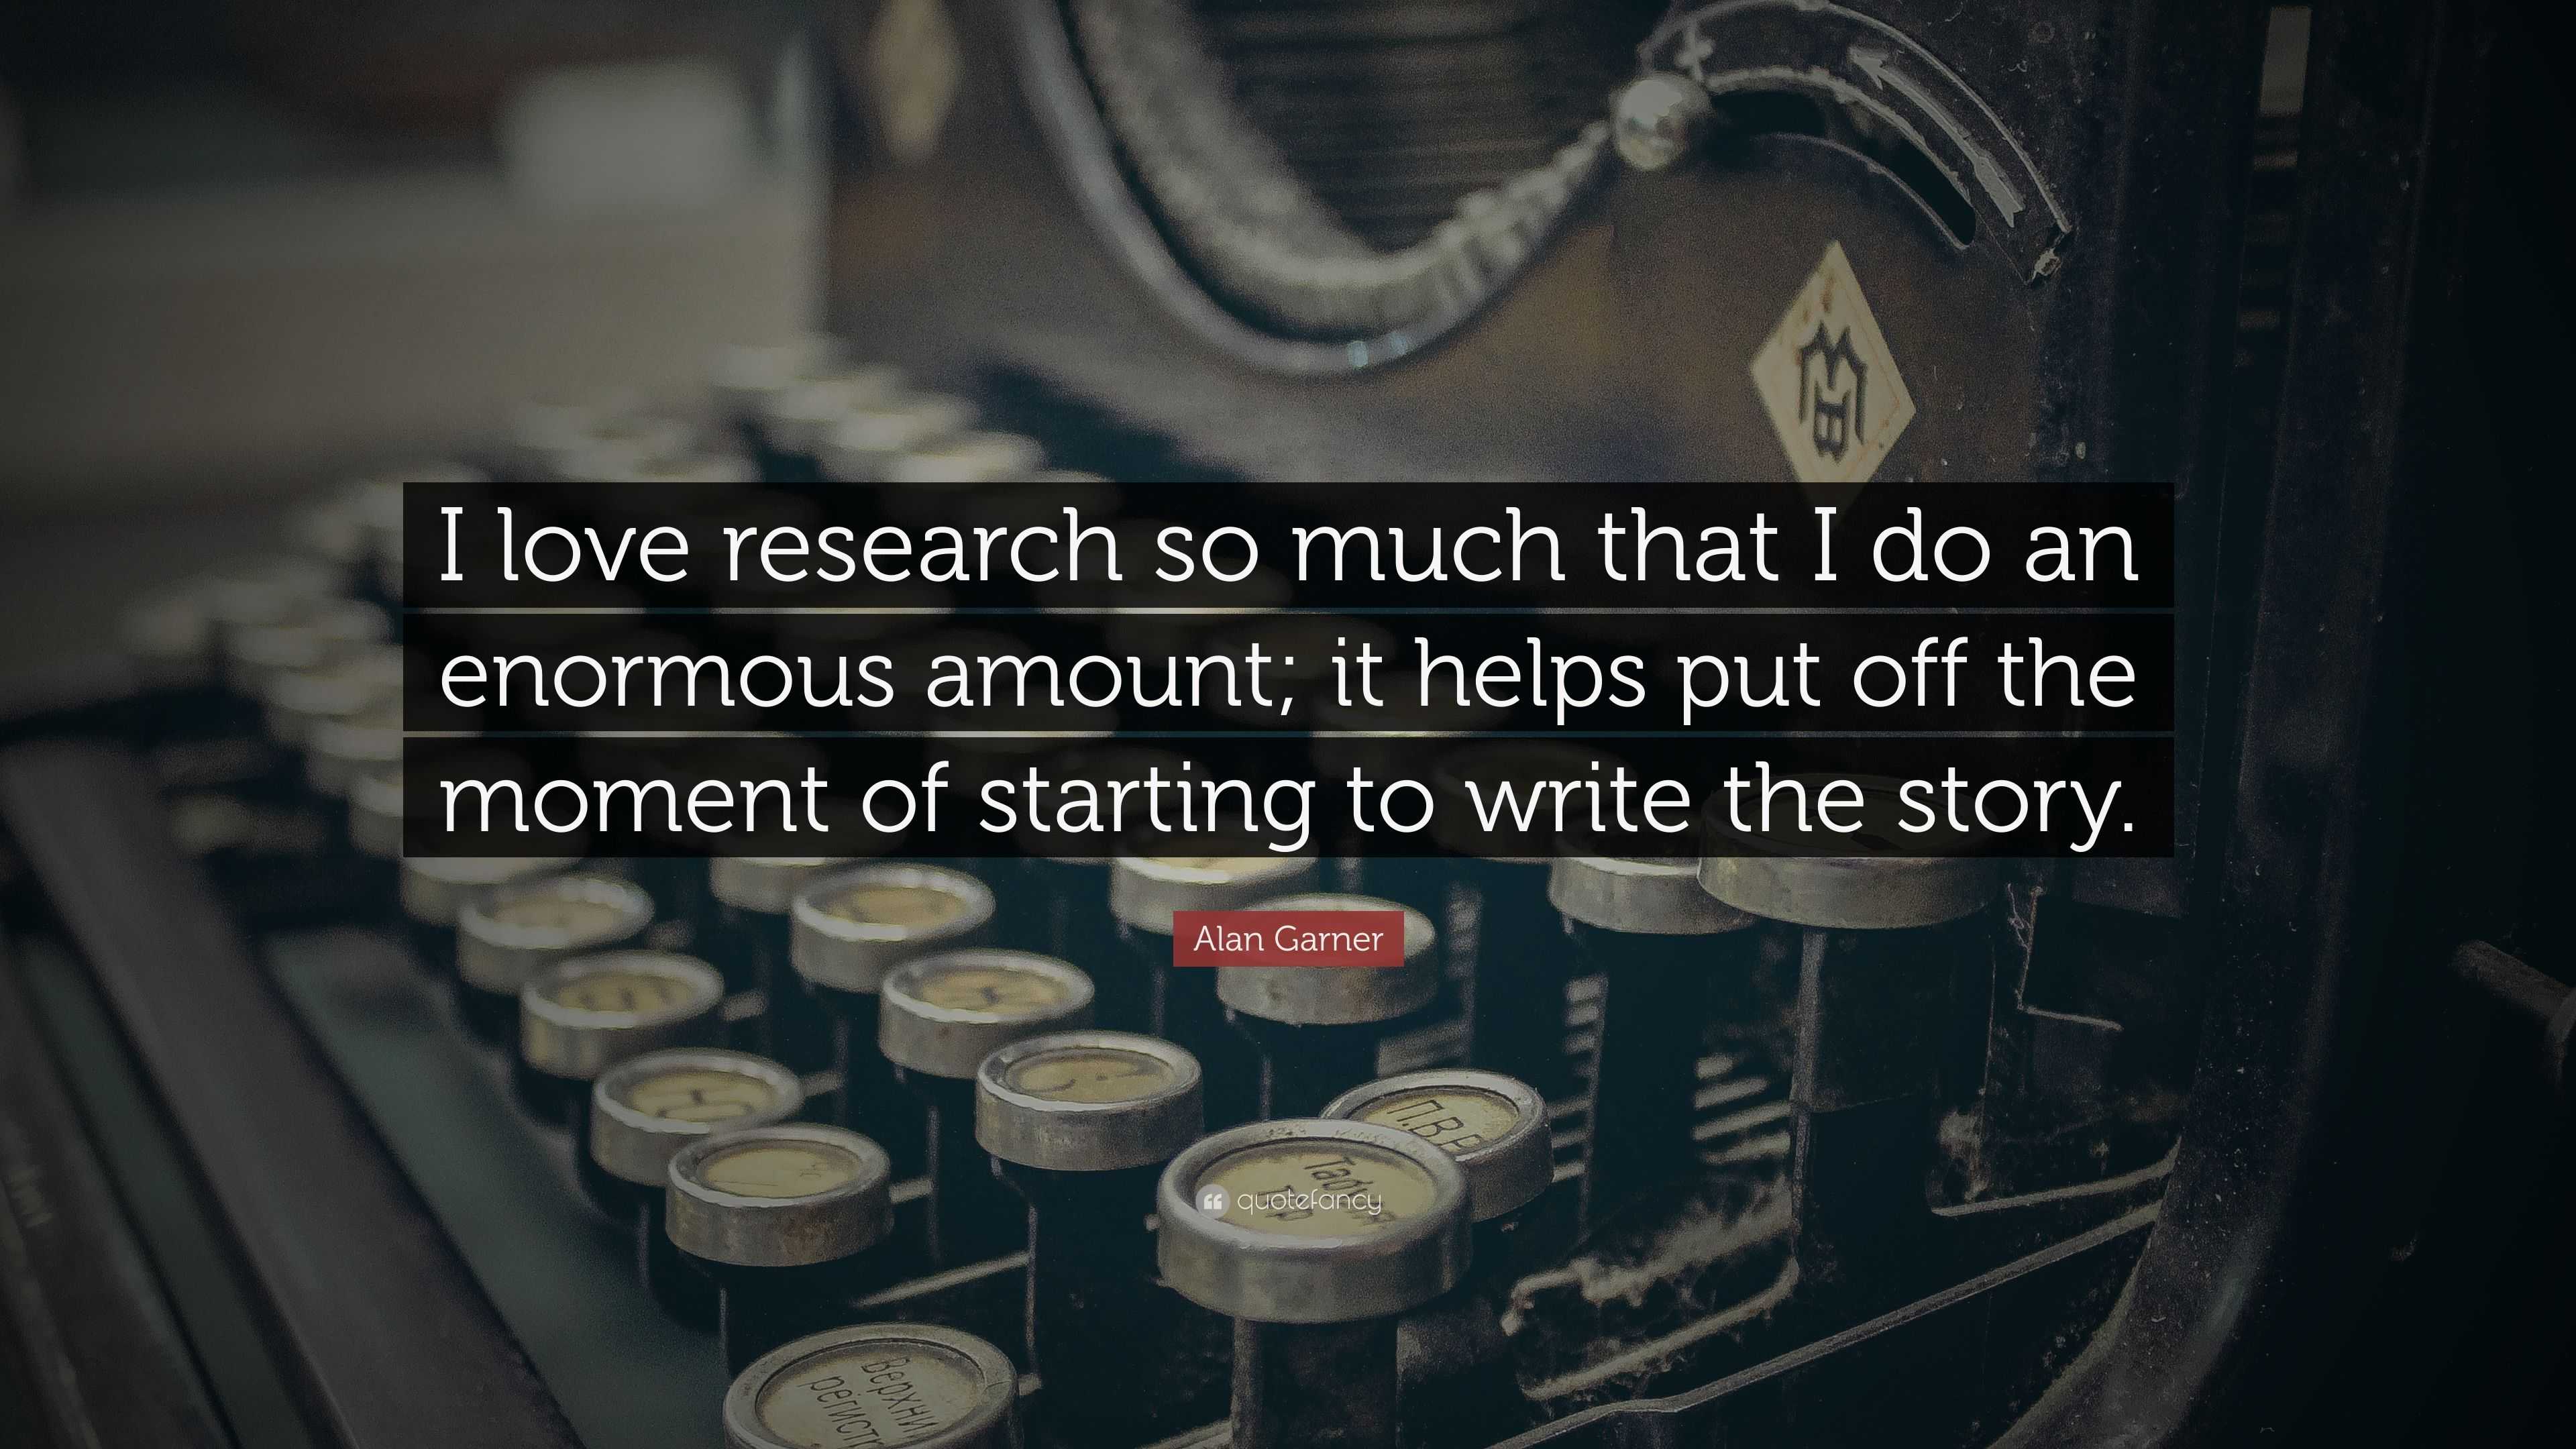 Alan Garner “I research so much I do an enormous amount; it helps